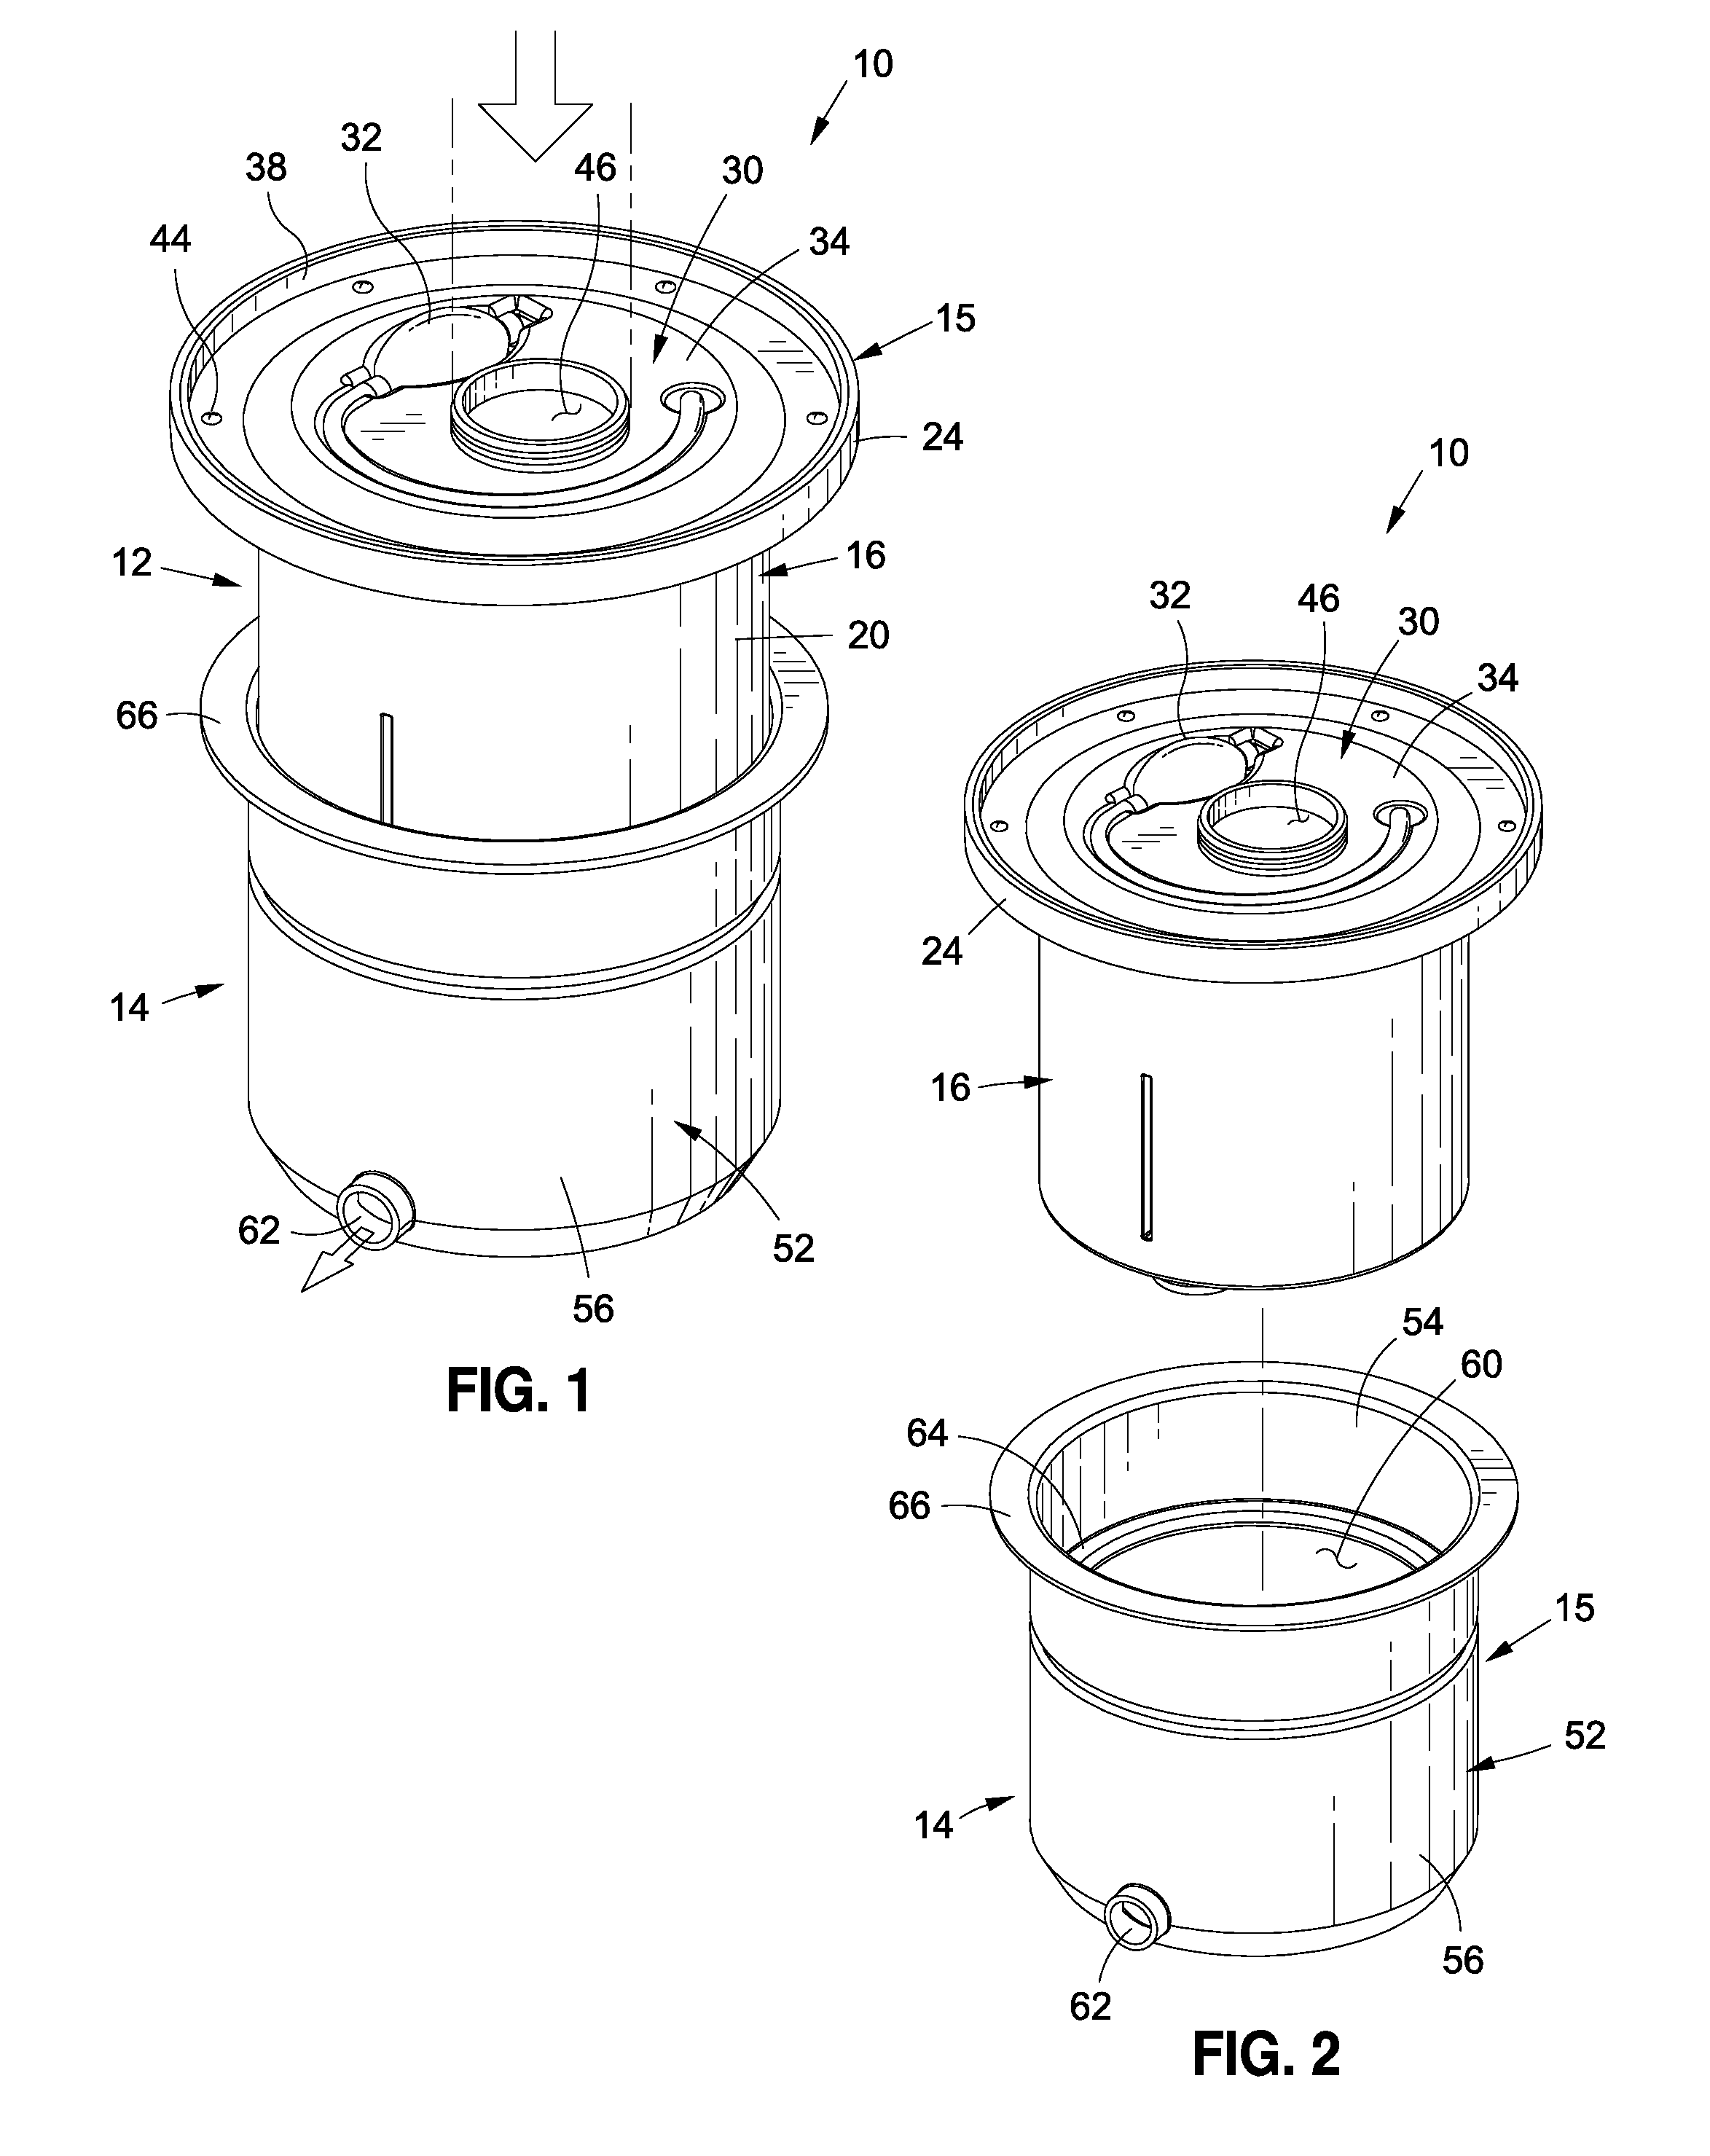 Water filtration system having selectively configurable filtration capabilities